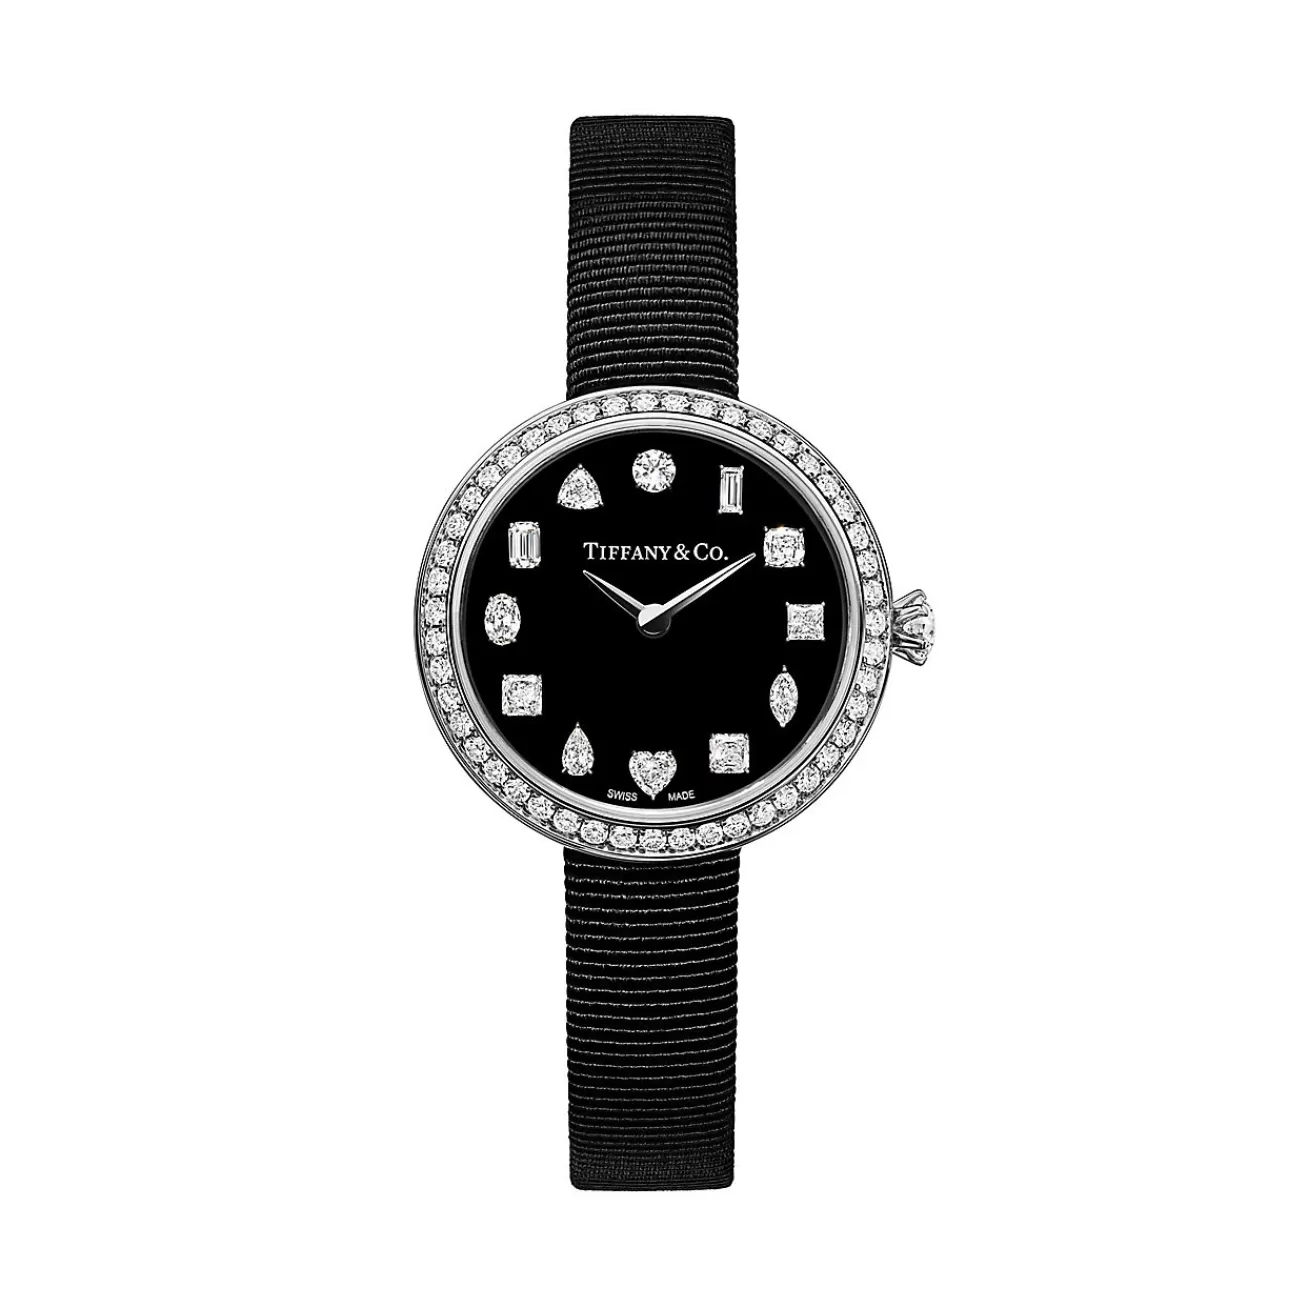 Tiffany & Co. Tiffany Eternity 28 mm Round Watch in White Gold with Diamonds | ^Women Fine Watches | Women’s Watches